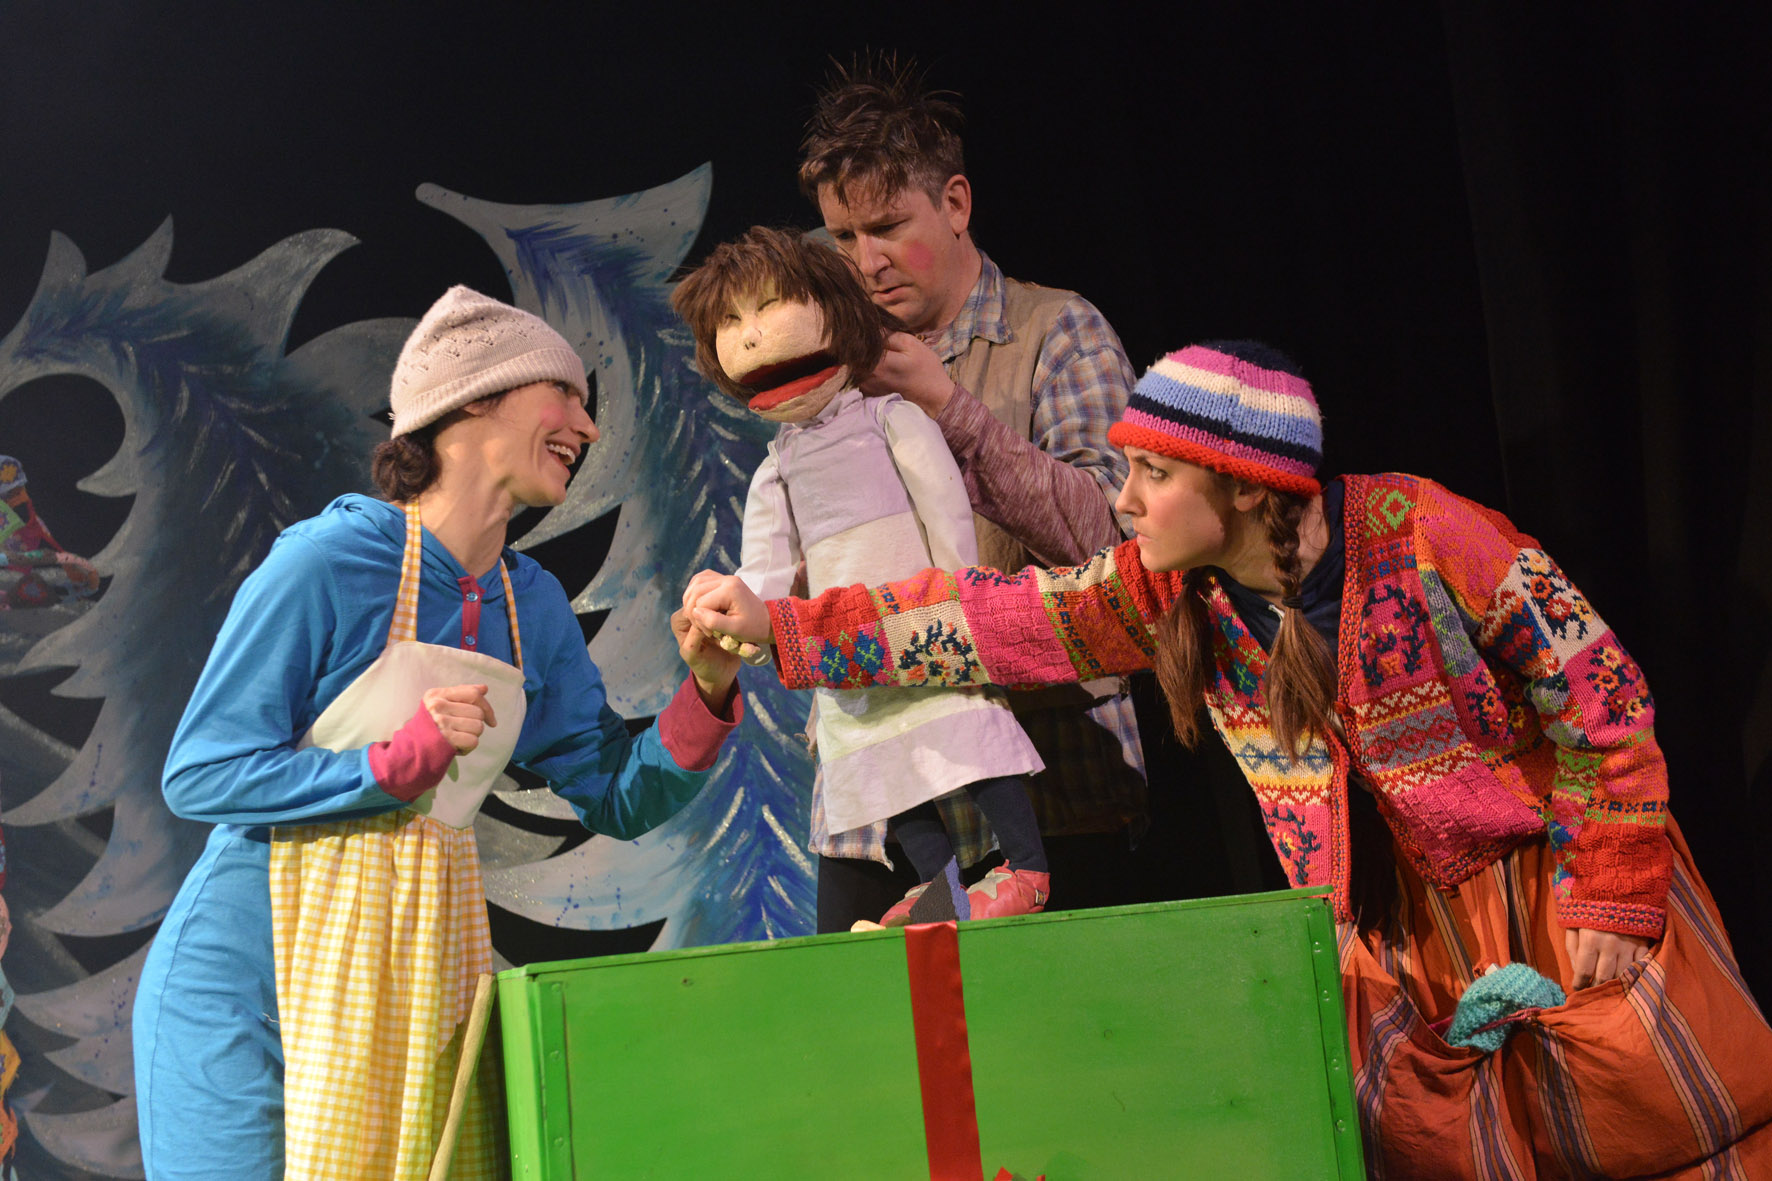 3 performers are around a green box the size of a small table. One of them is operating a puppet of a small child.